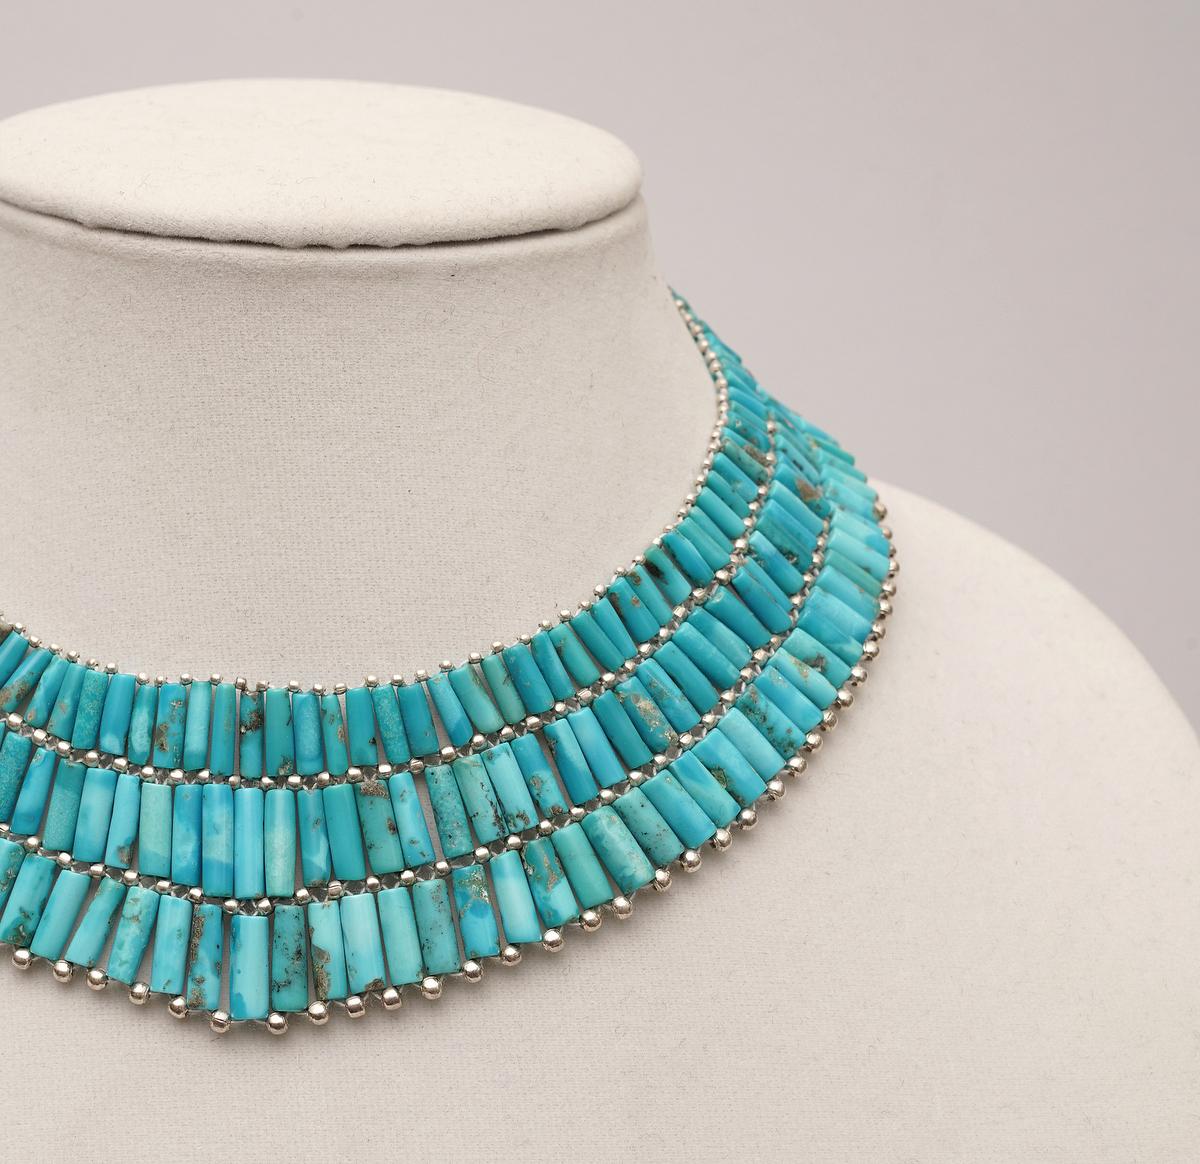 Women's or Men's Turquoise and Sterling Collar Necklace